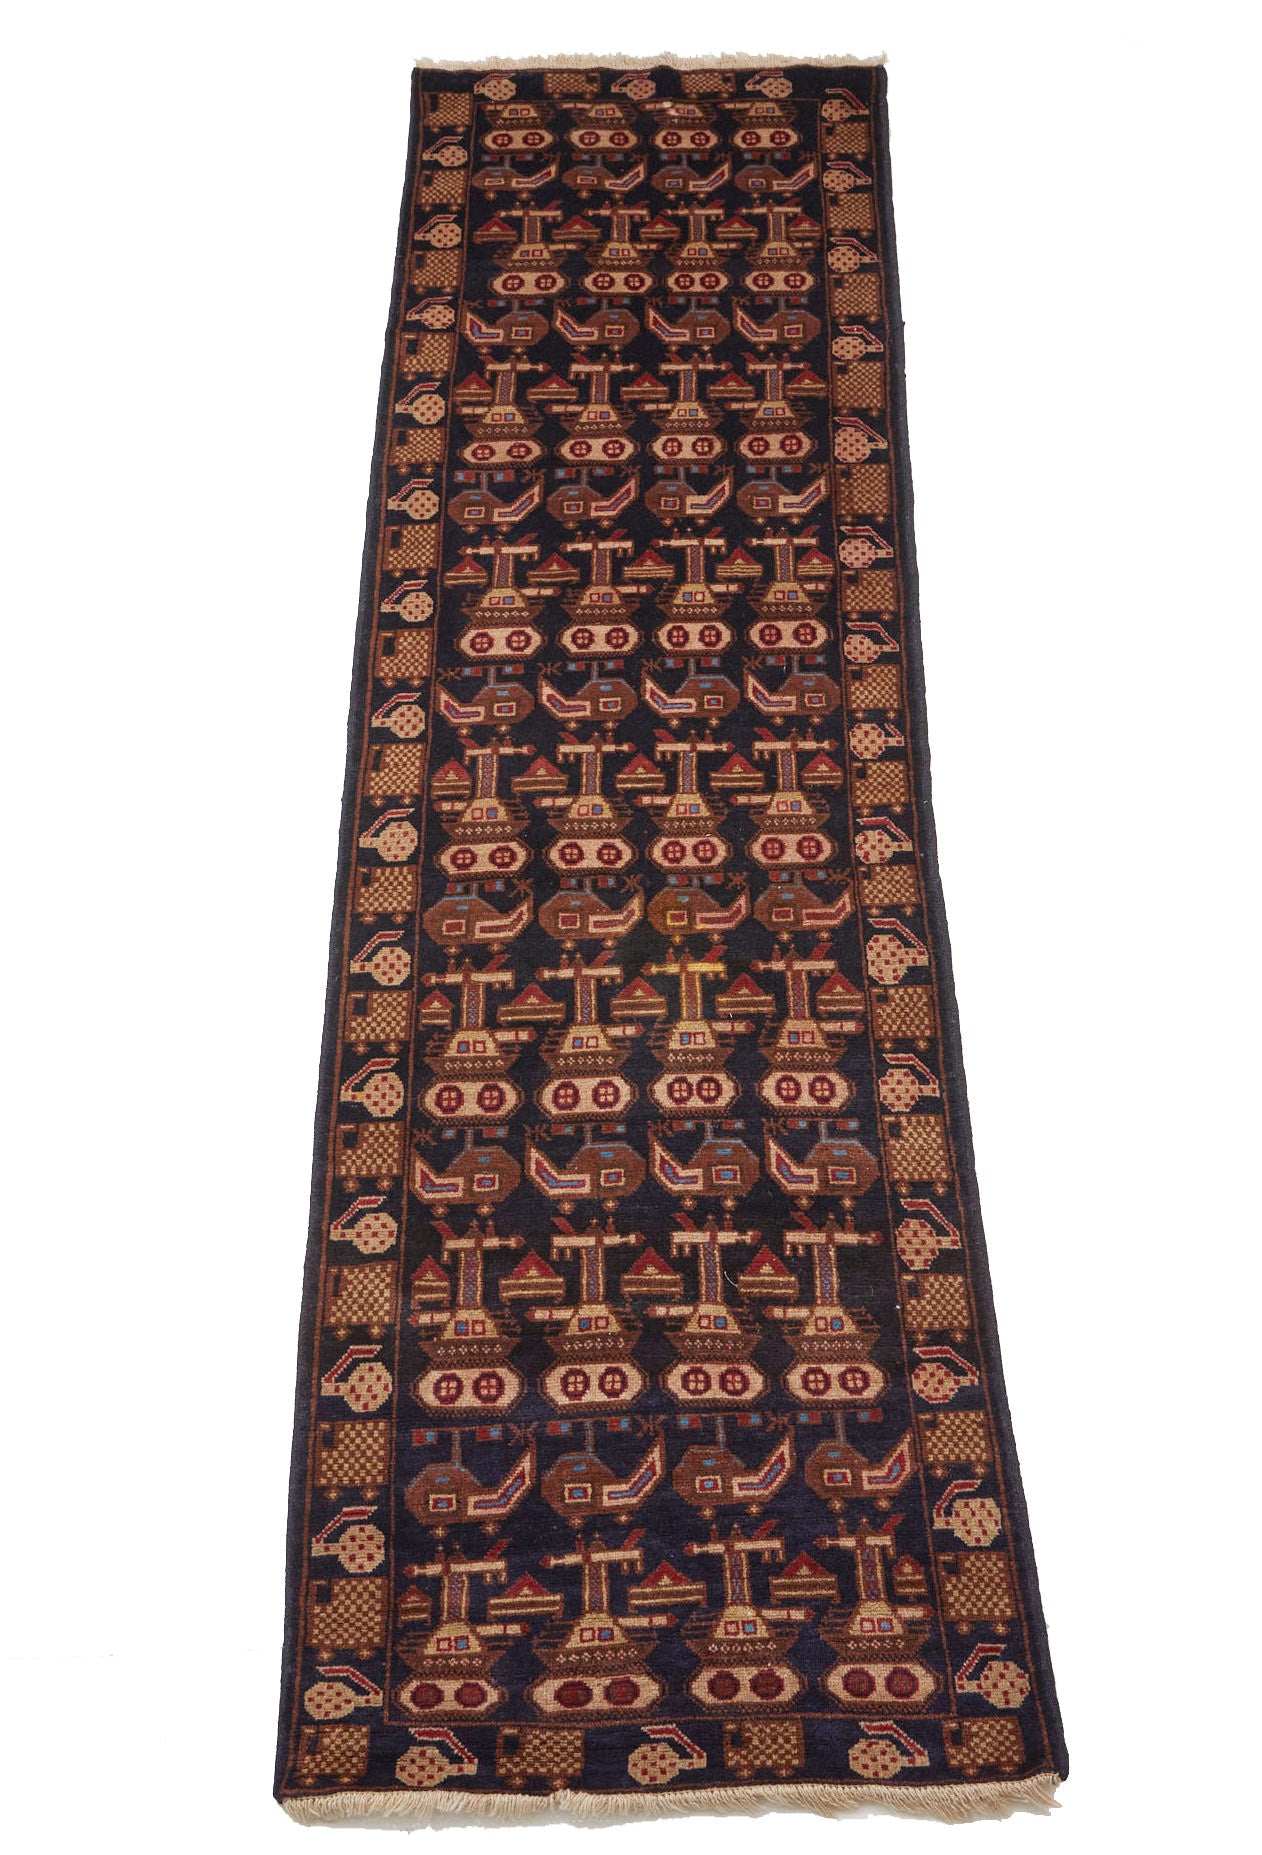 Hand woven Afghan War rug runner with dark base and tan, red and blue tanks and helicopters woven throughout - Available from King Kennedy Rugs Los Angeles